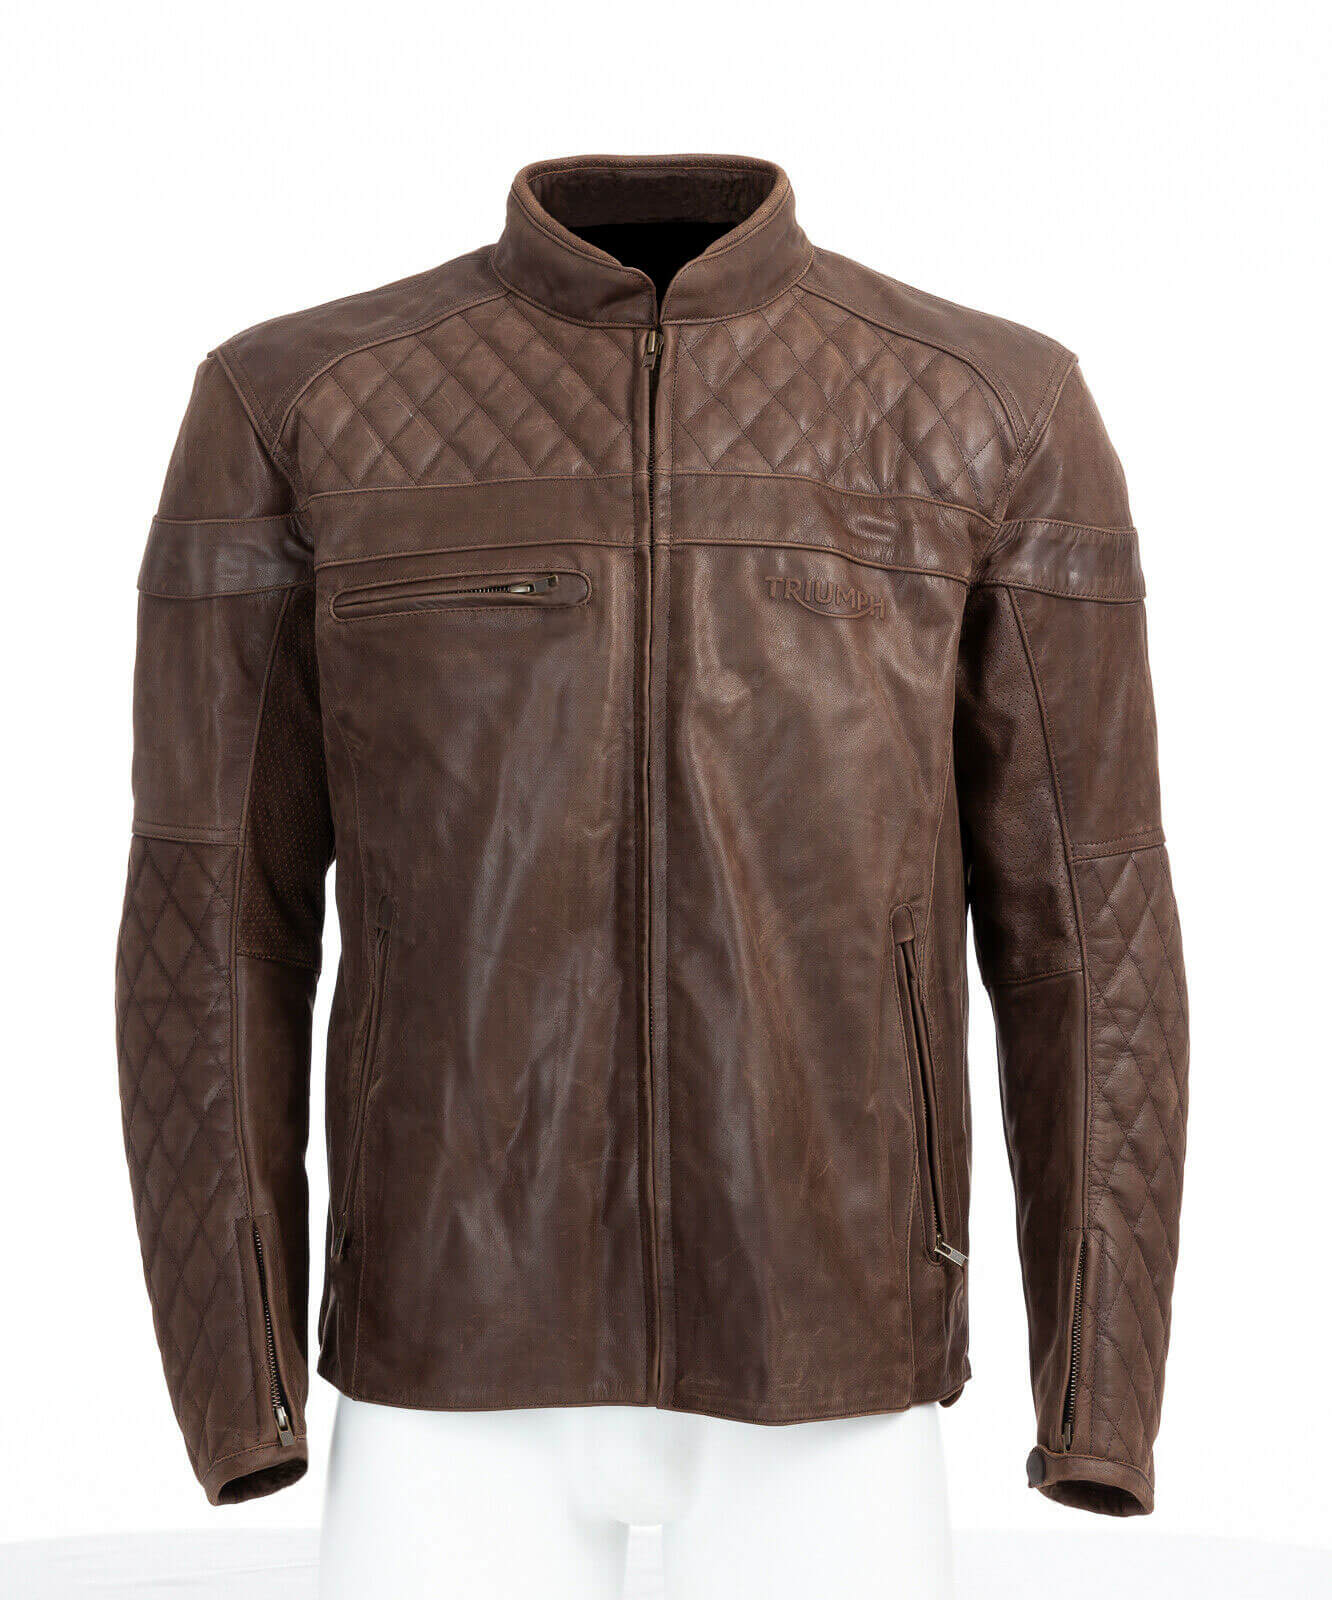 Triumph Motorcycle Brown Leather Jacket - Maker of Jacket